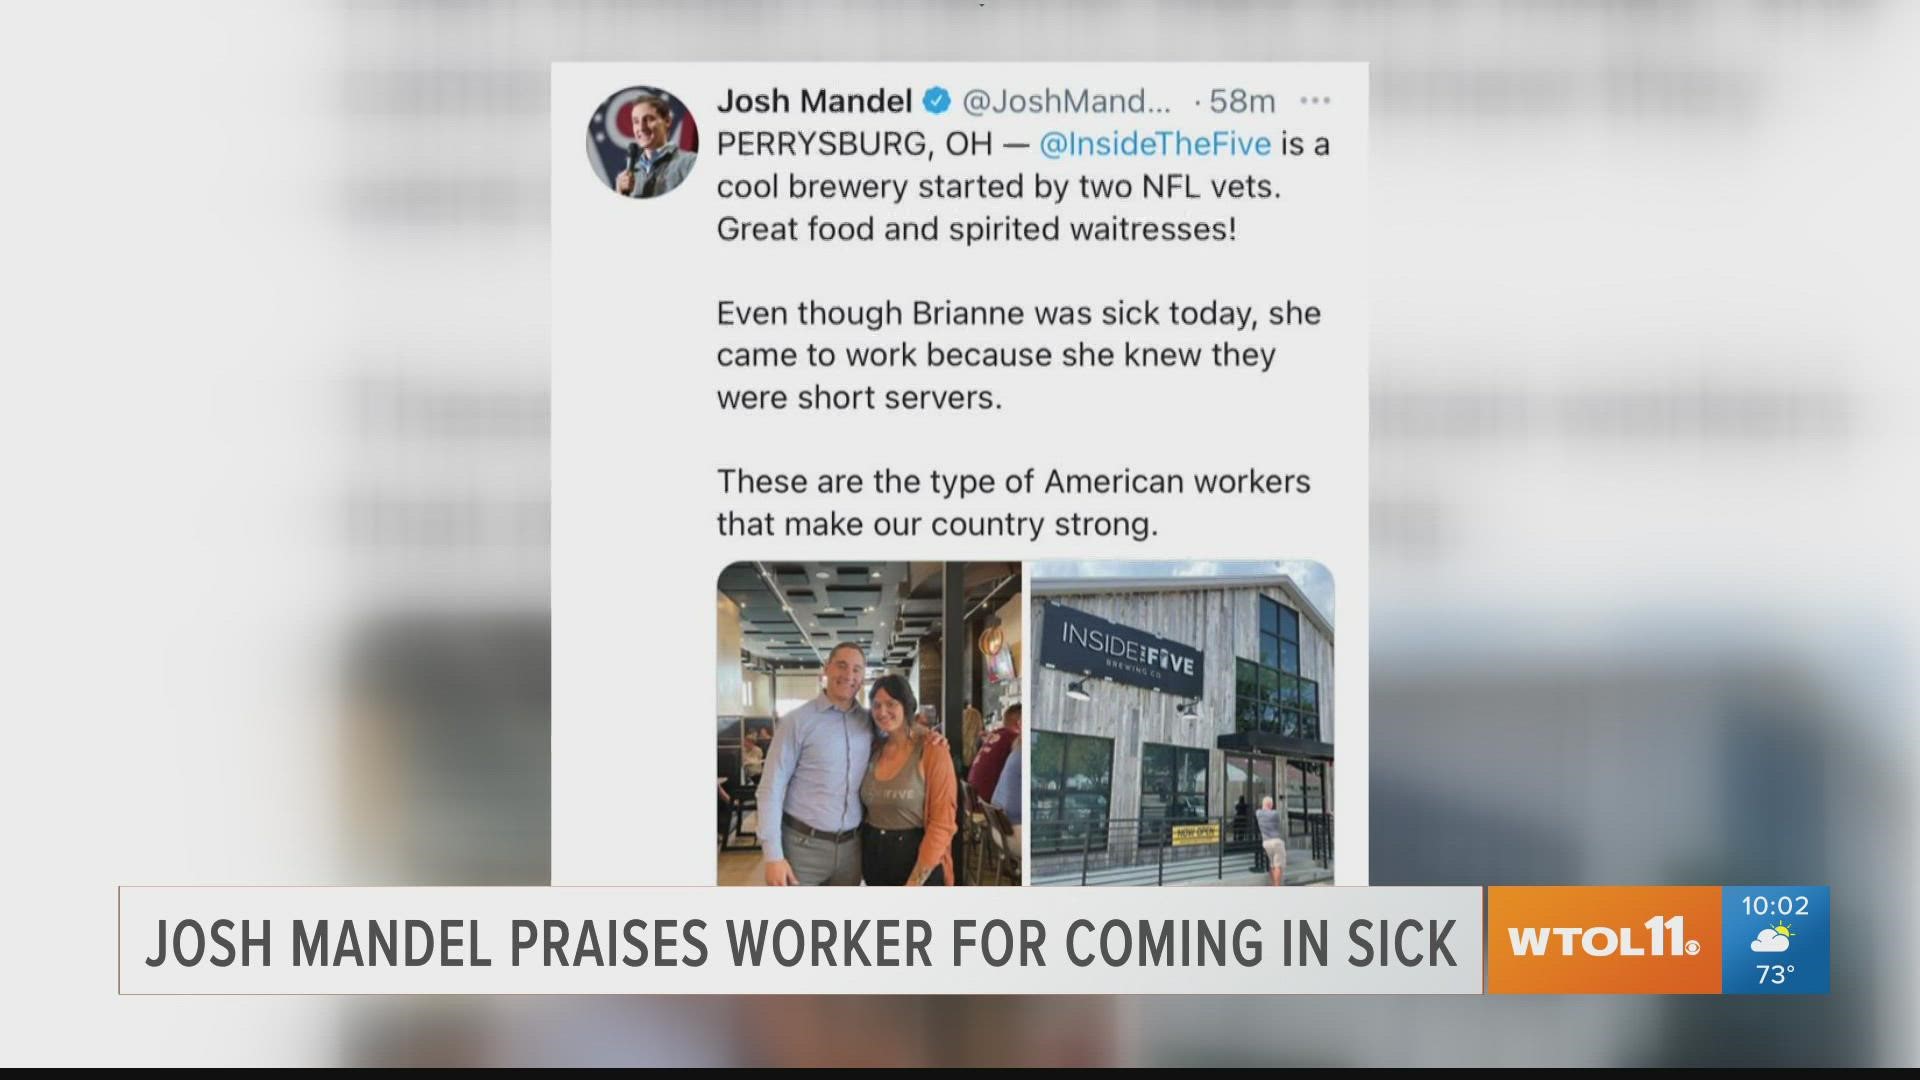 The former Ohio treasurer visited a brewpub in Perrysburg and tweeted about an encounter with a worker that he said came in sick to help shorthanded staff.